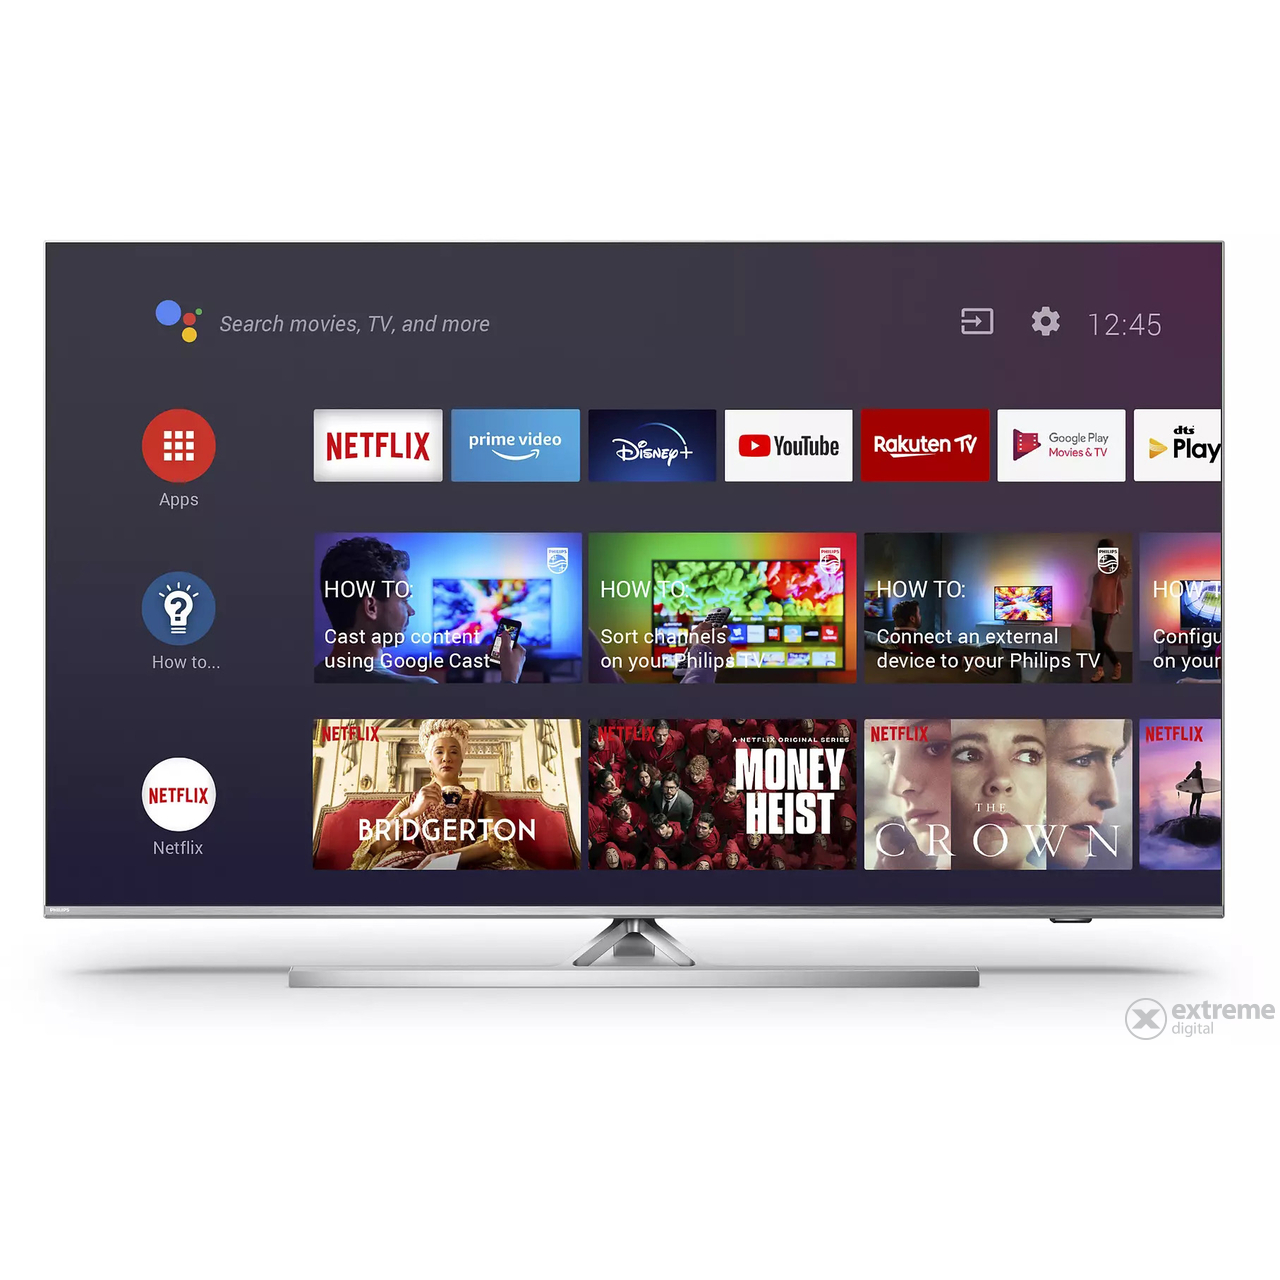 Philips 43PUS8506 UHD Ambilight Android Smart LED TV